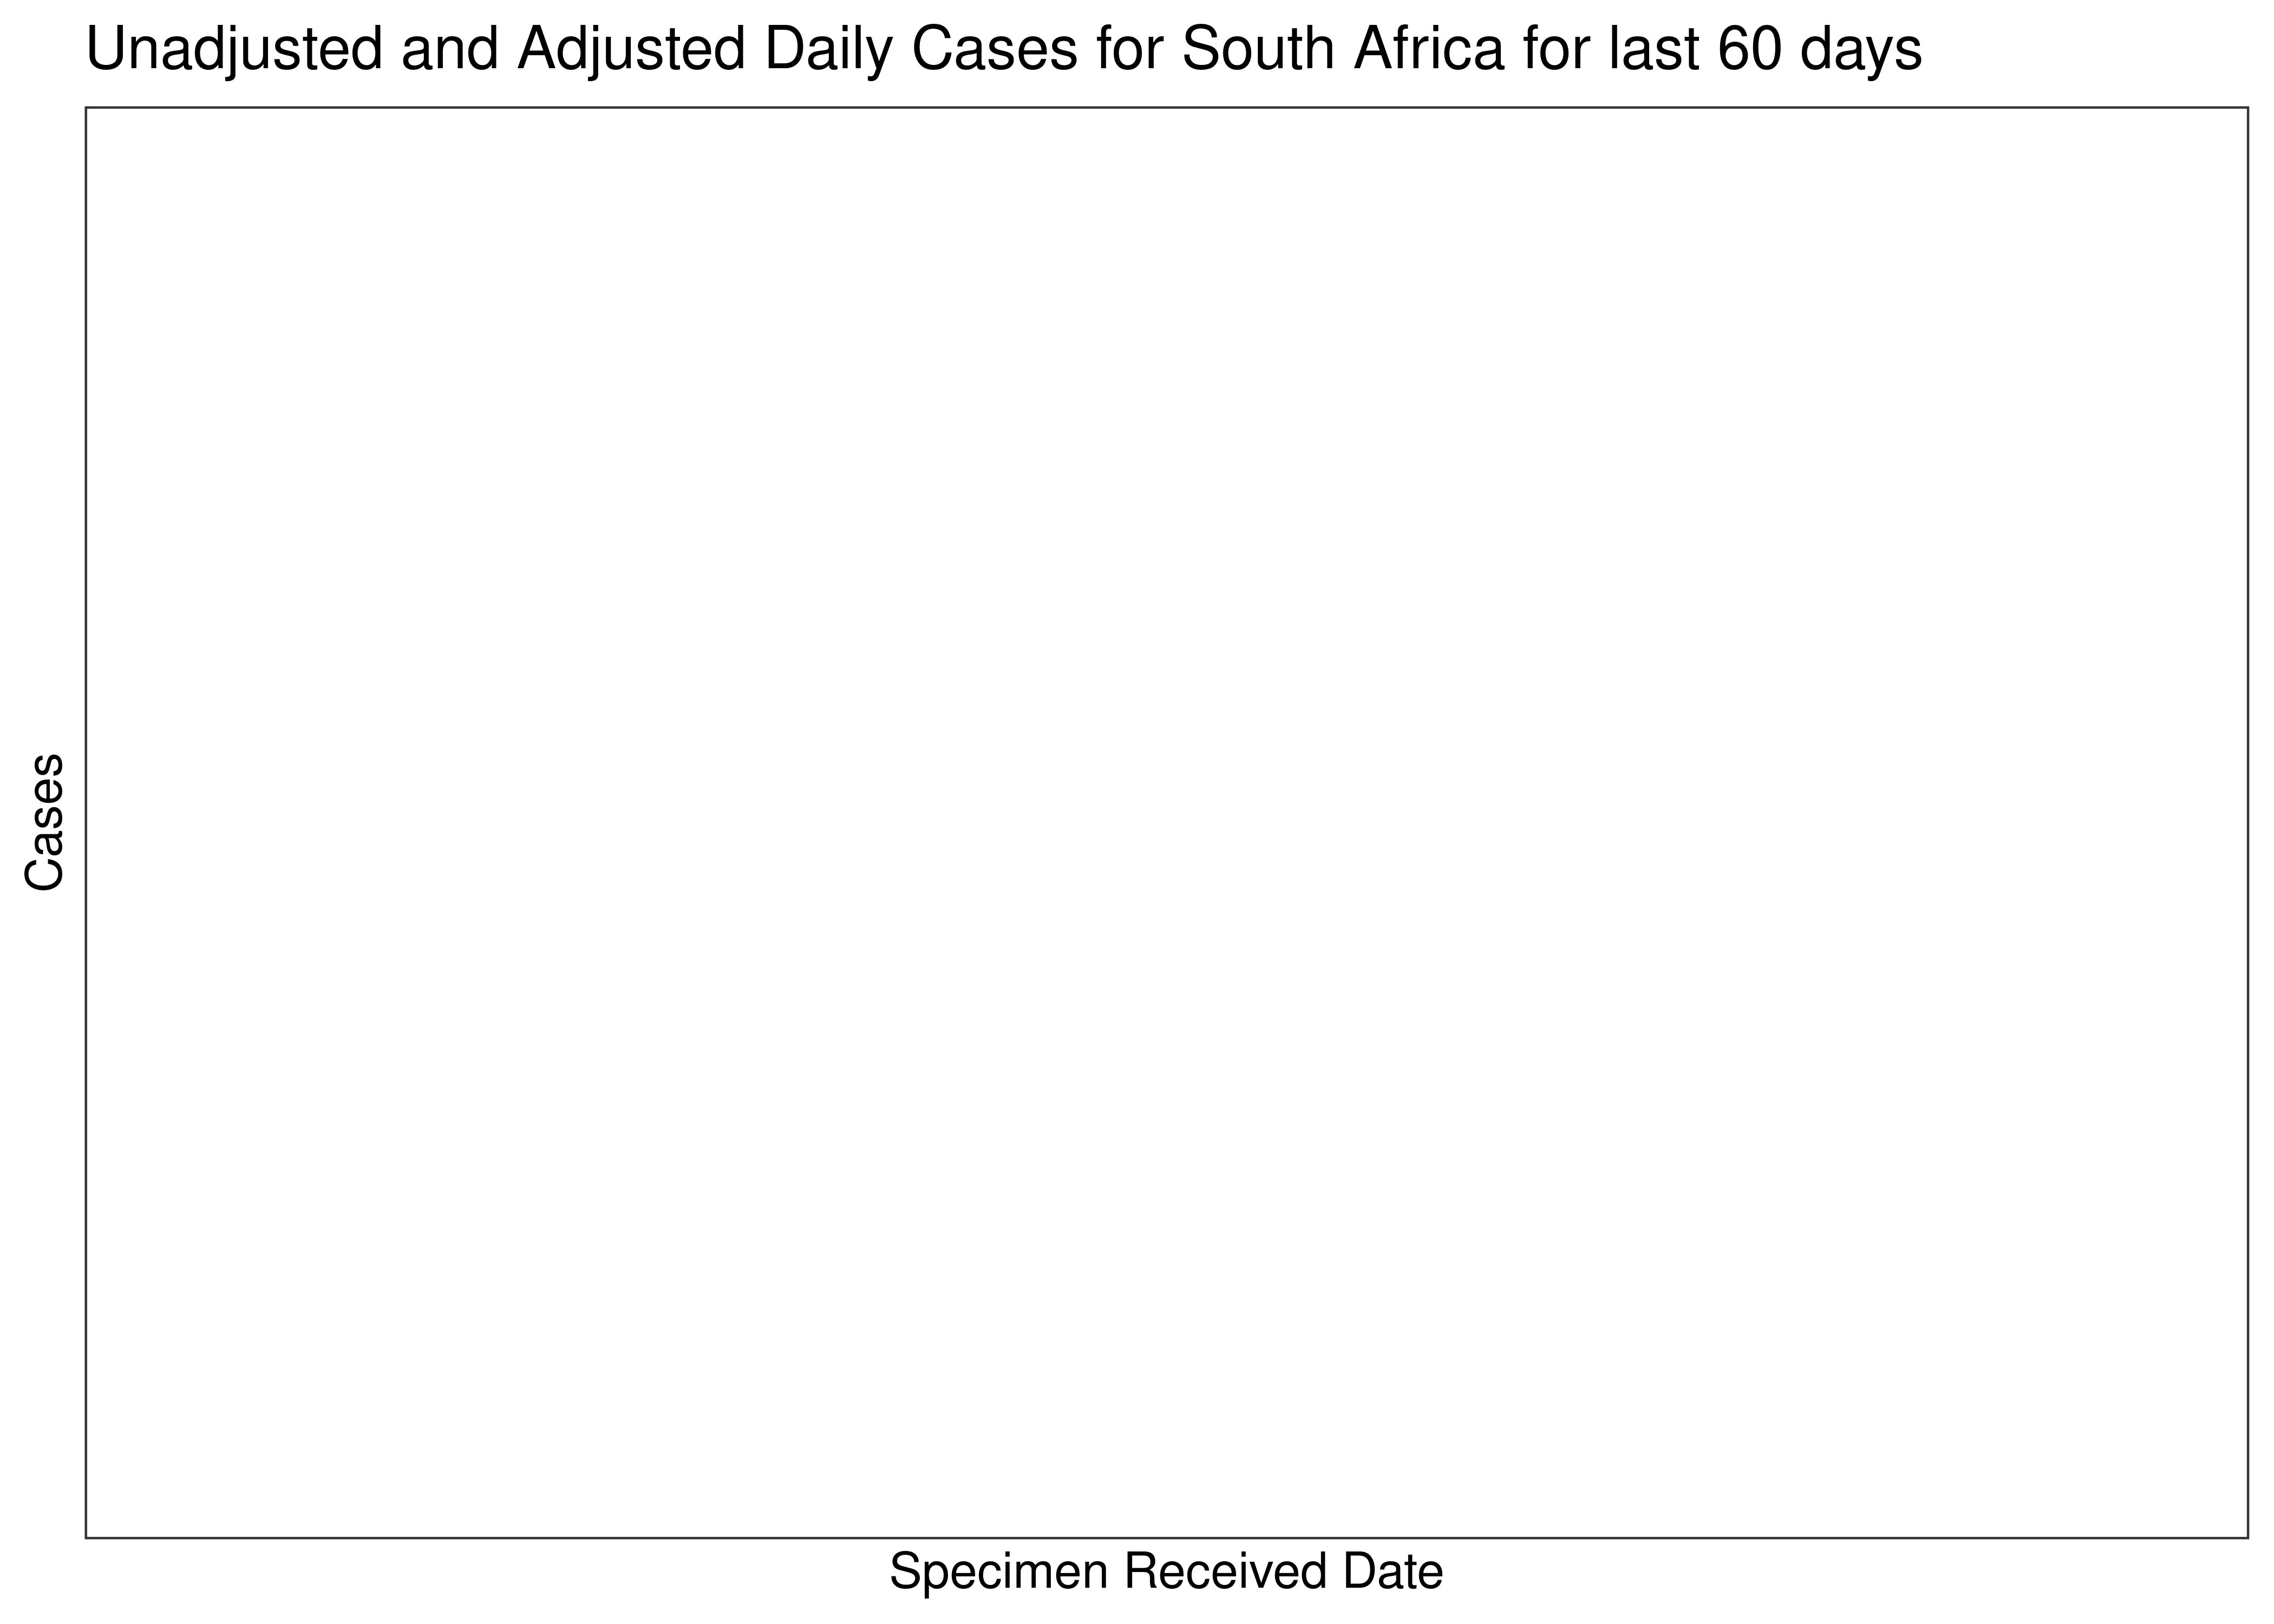 Unadjusted and Adjusted Daily Cases for South Africa for last 60 days